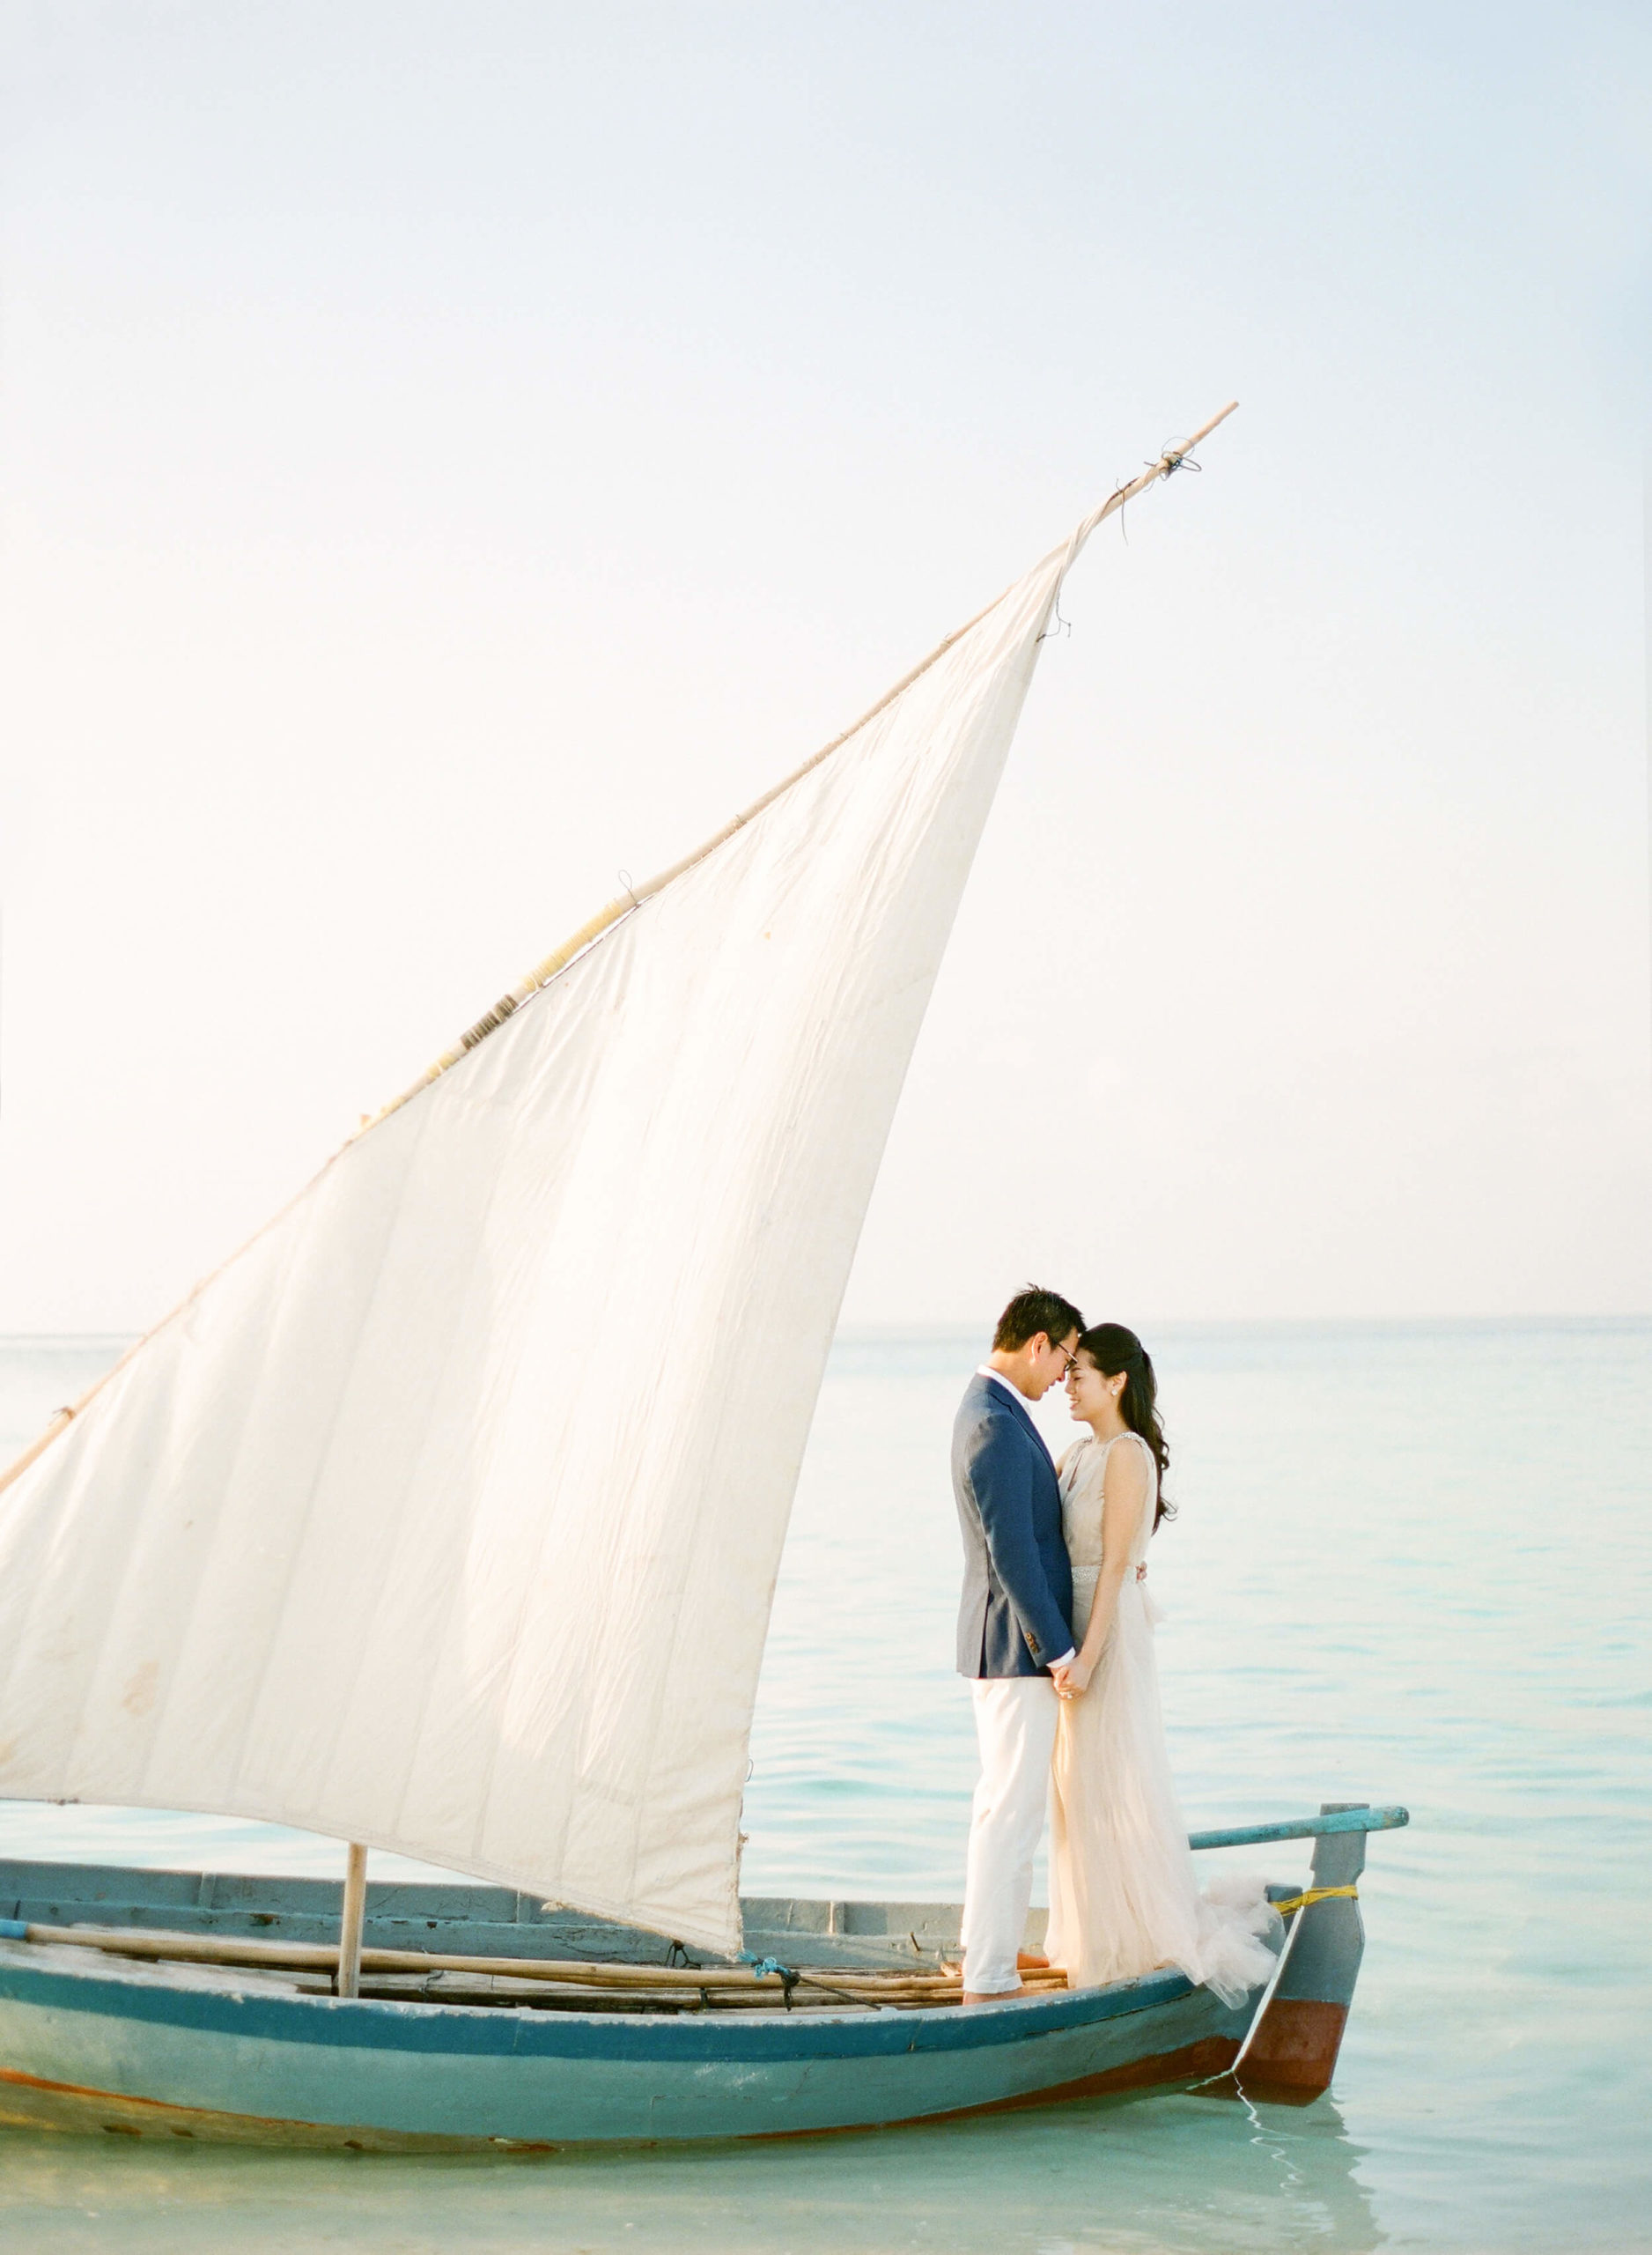 Bride and groom on a sailboat in the Maldives